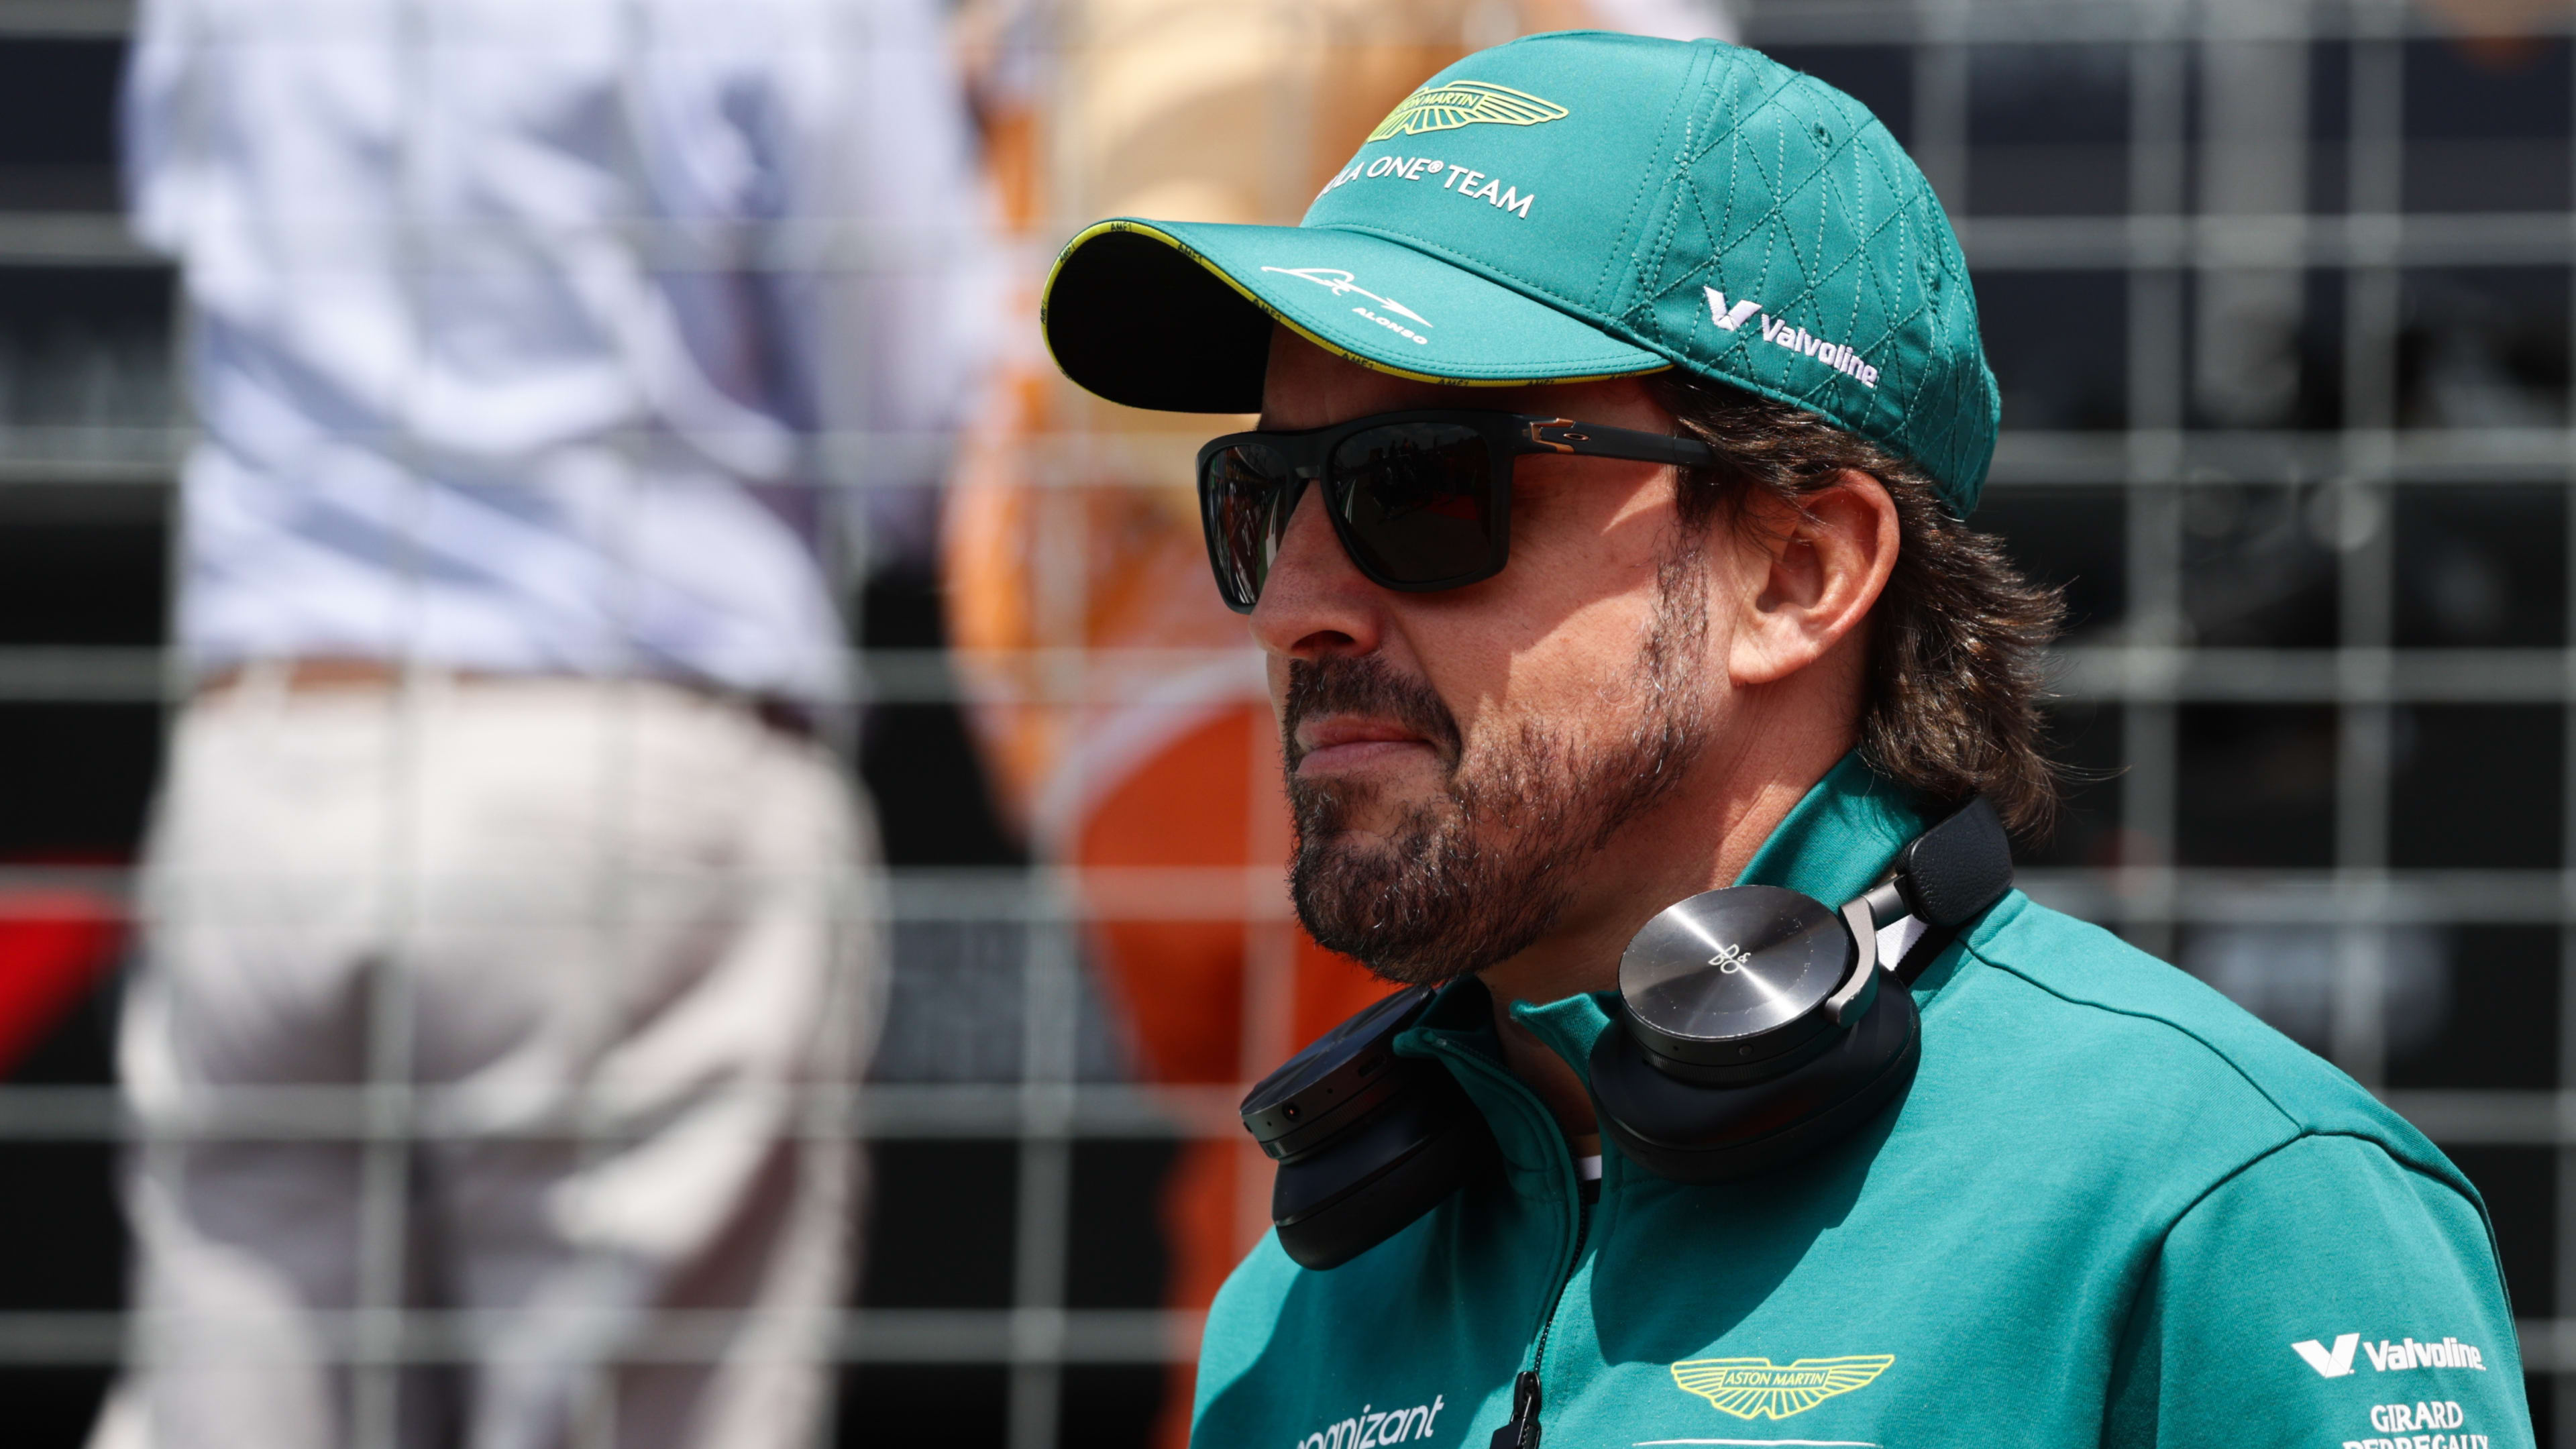 Alonso keen to bounce back in Monaco after finishing P19 on ‘tough’ Imola weekend